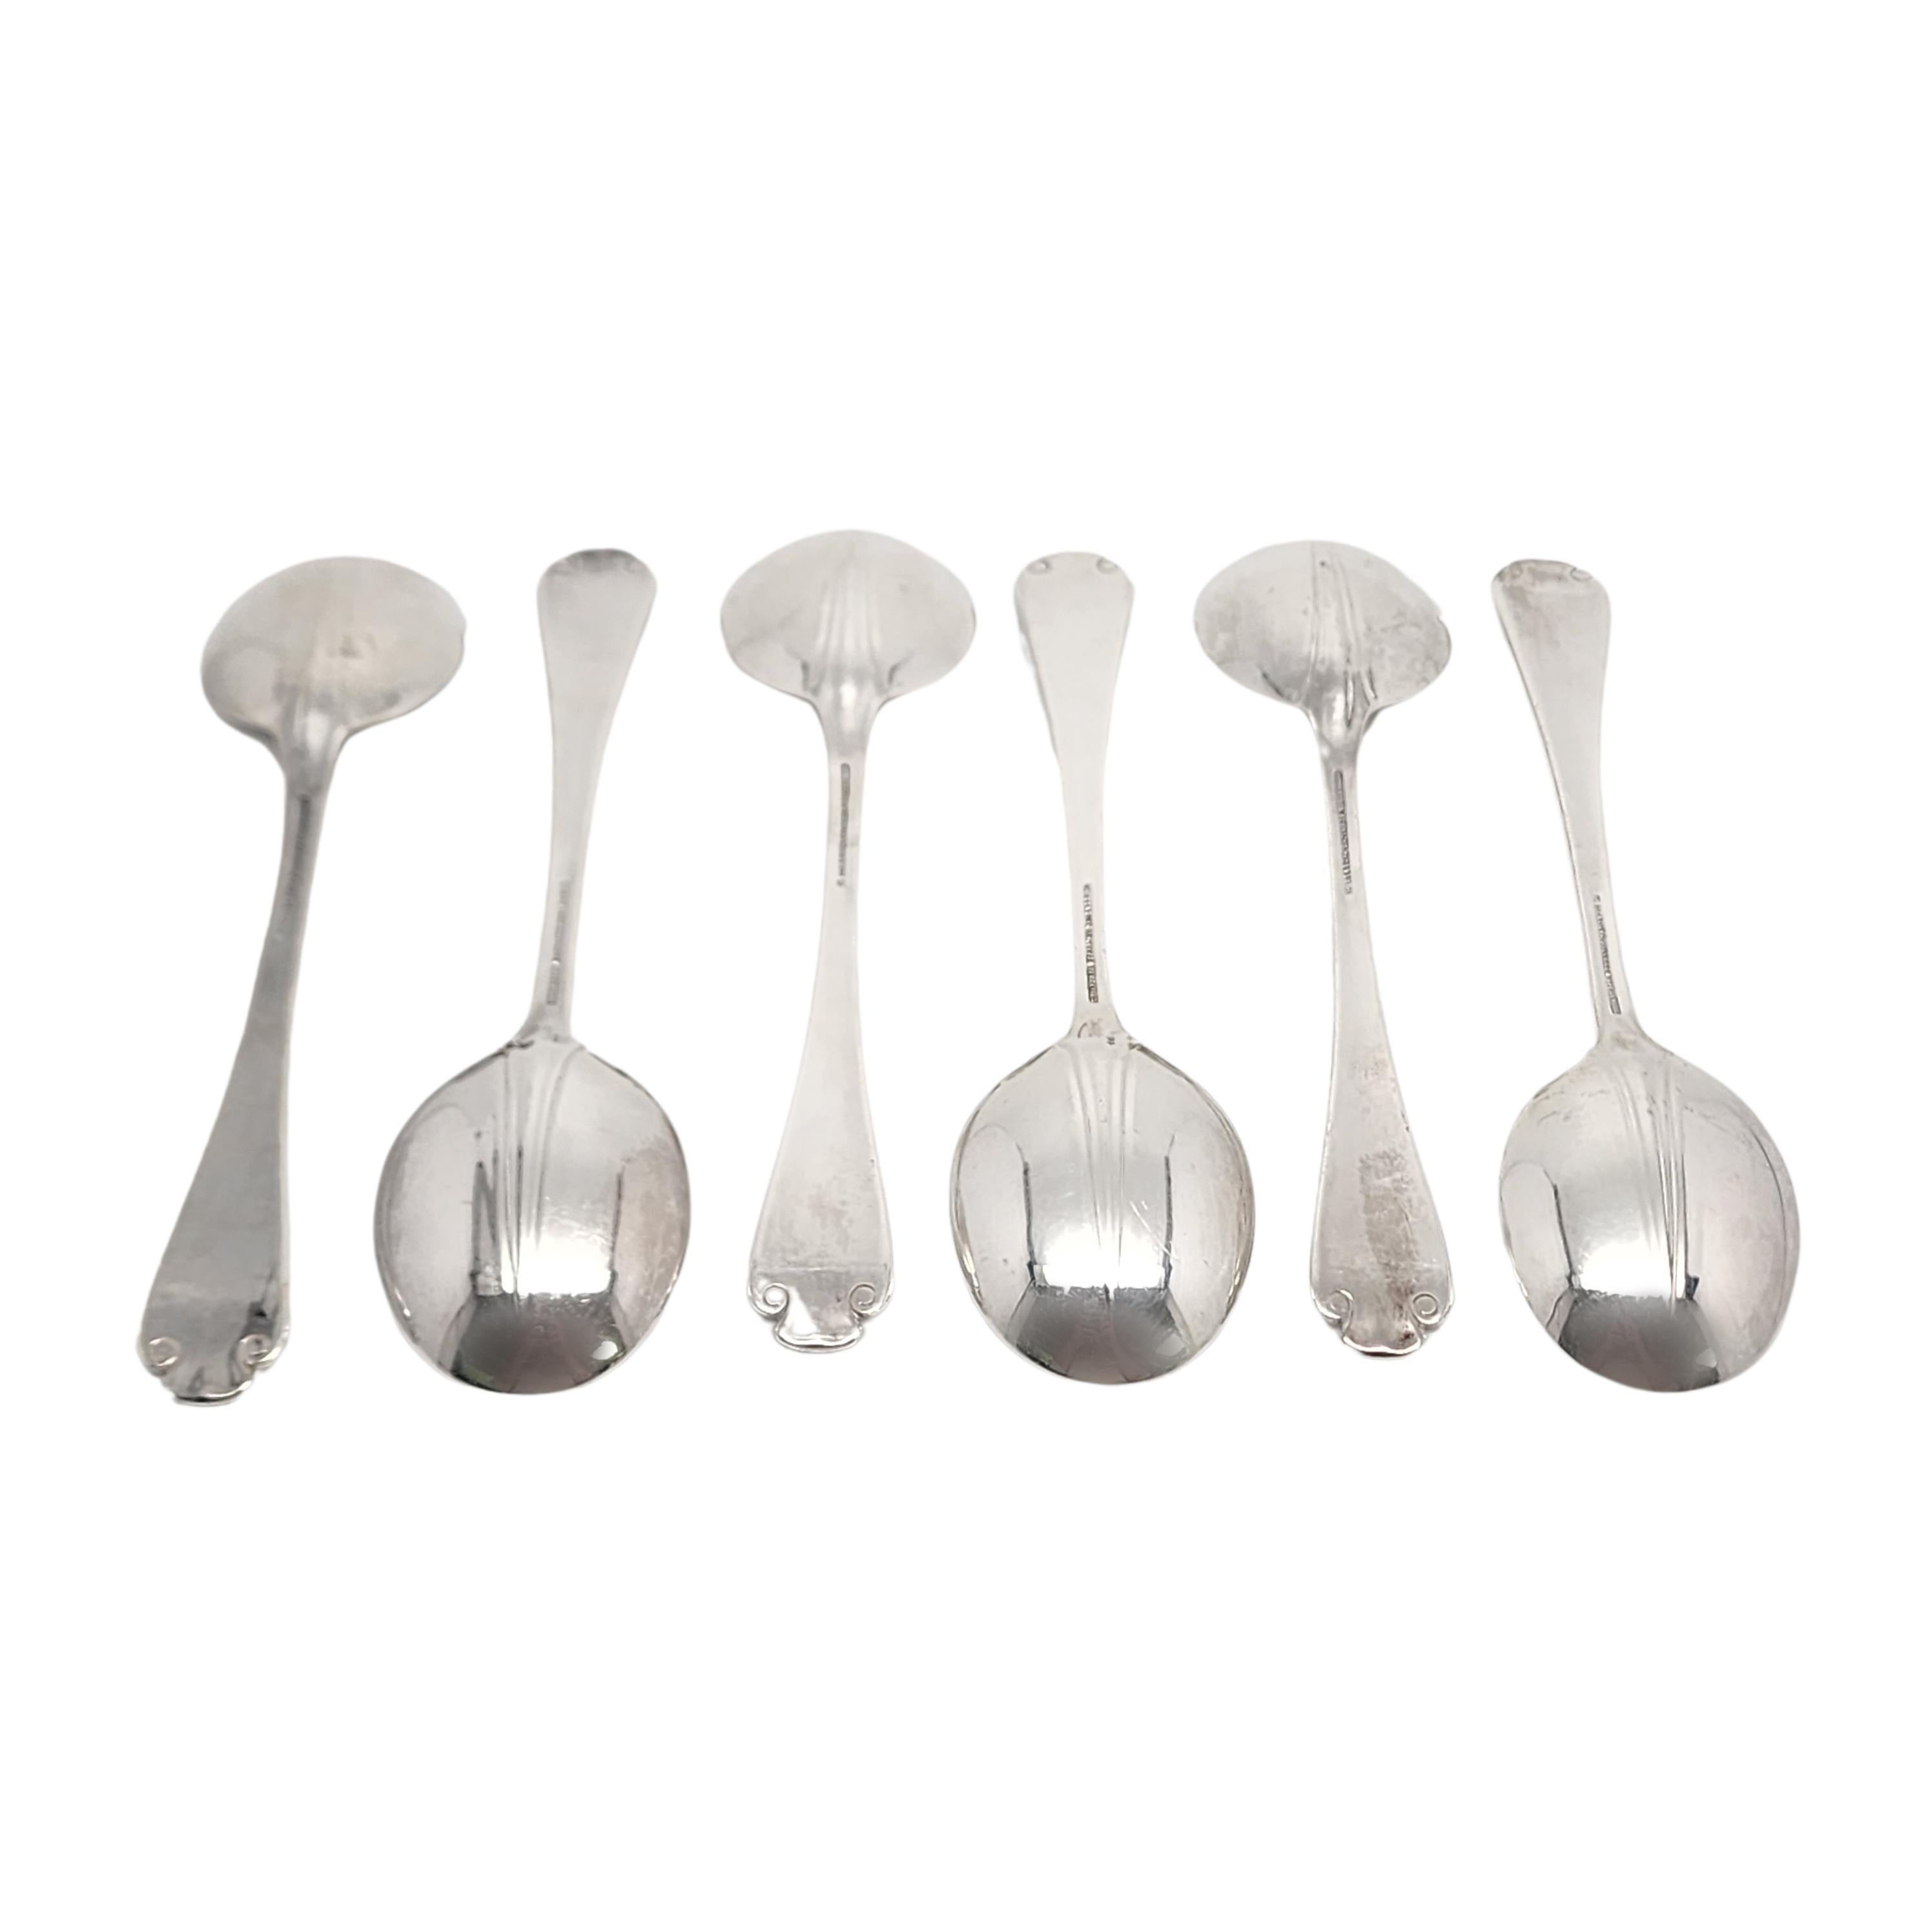 Set of 6 sterling silver round bowl soup spoons by Tiffany & Co in the Flemish pattern.

No monogram.

The Flemish pattern features a simple and elegant scroll design, making it a timeless classic that is still in demand today. Hallmarks date these